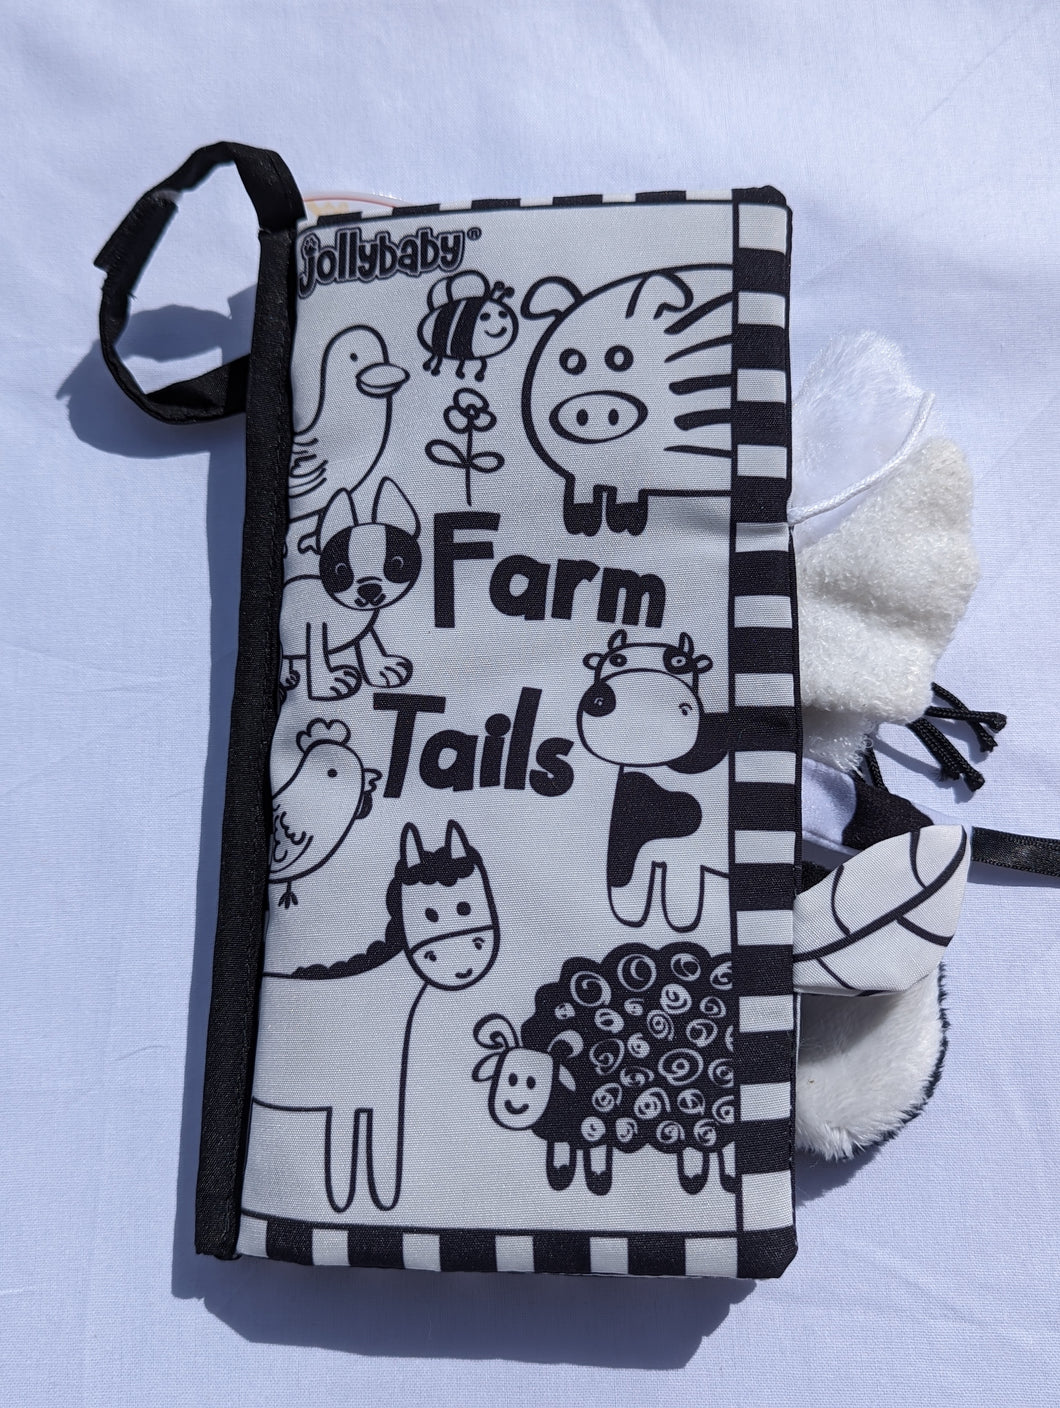 Jollybaby Animals Tails Cloth Book - Black and White